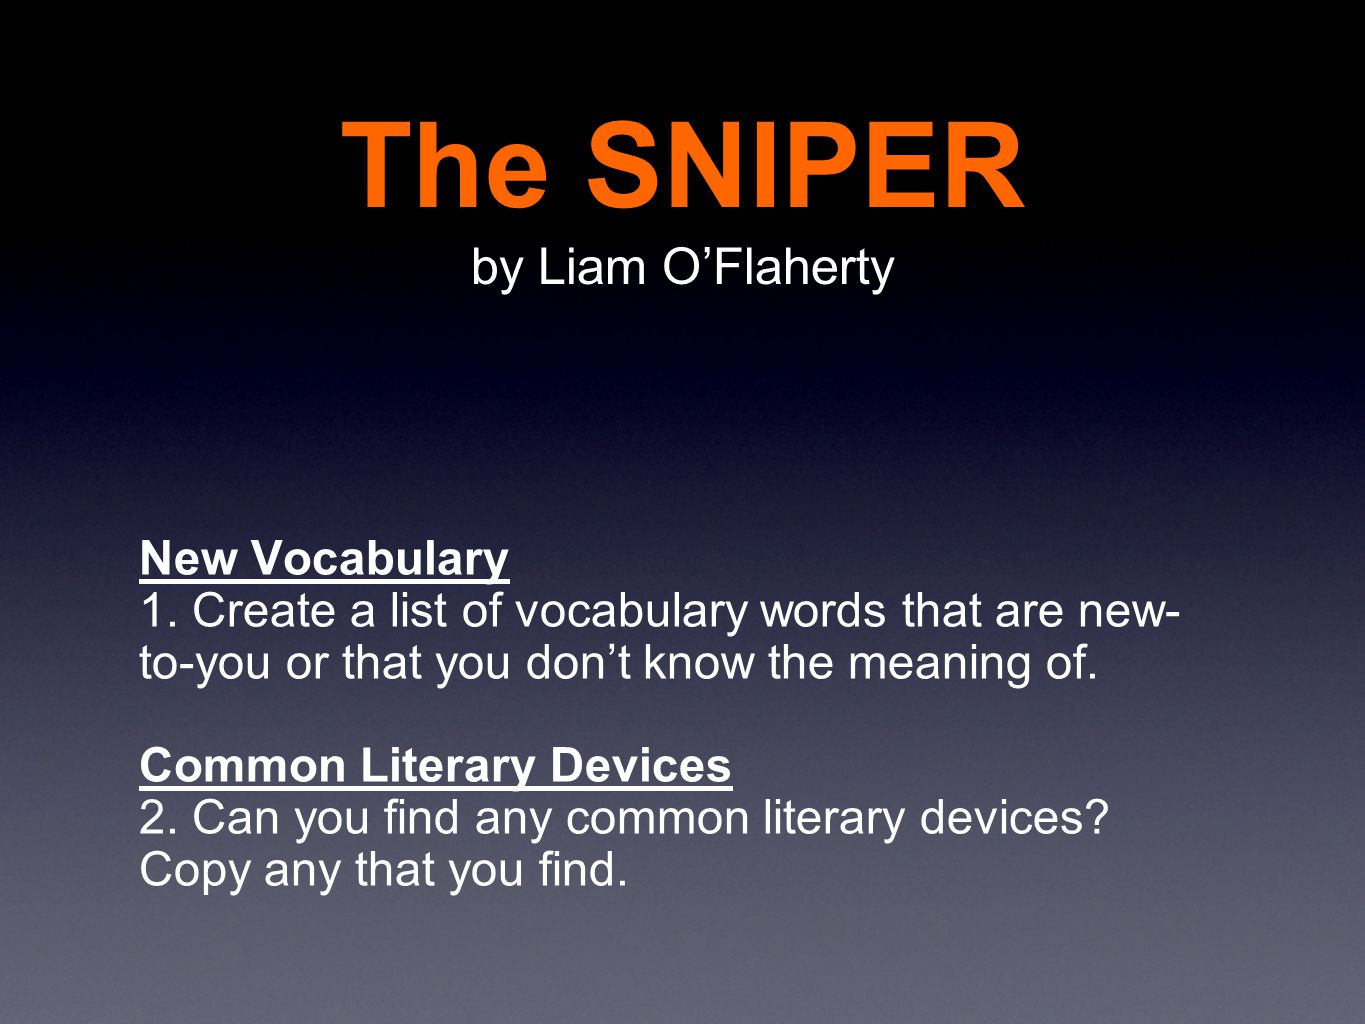 The sniper a story about the